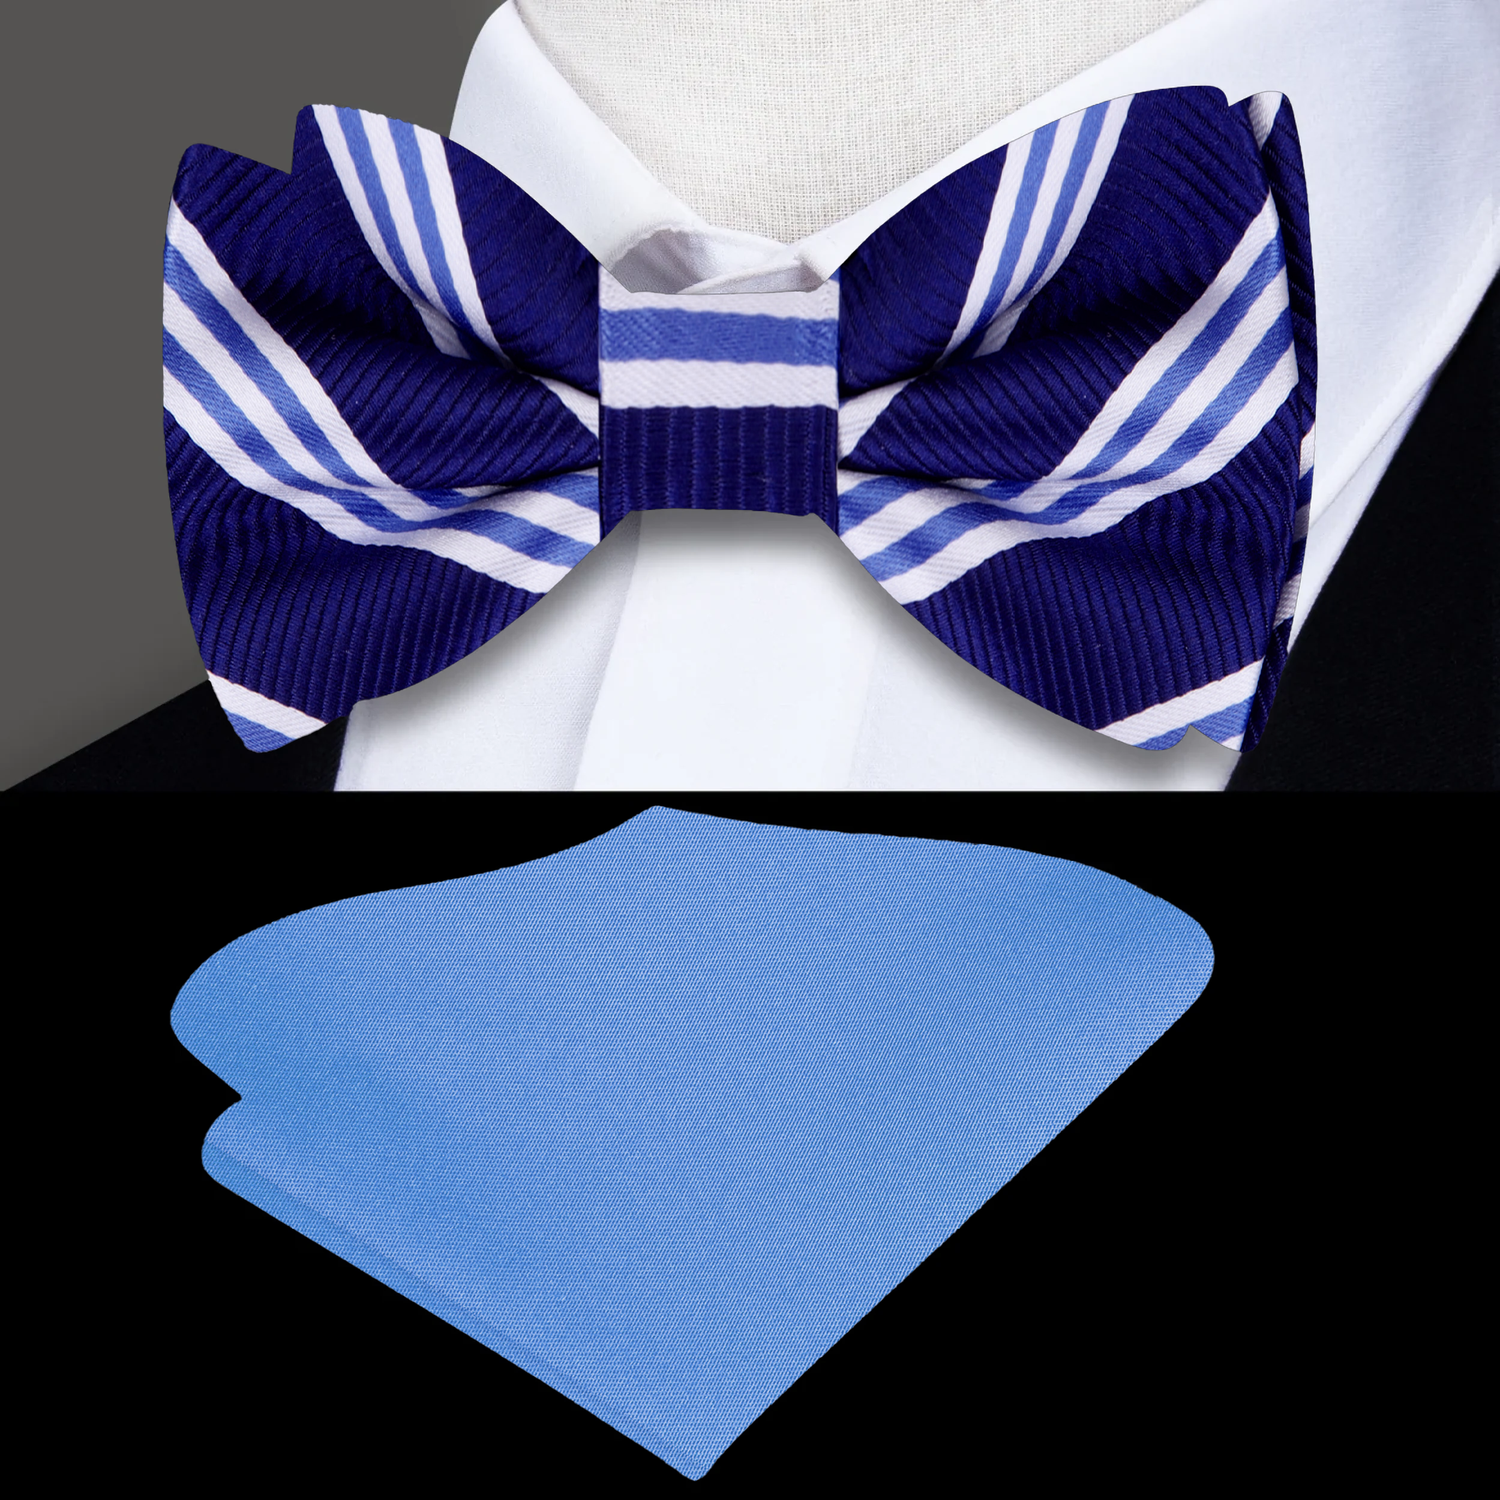 Blue, White Stripe Bow Tie and Blue Square||Blue